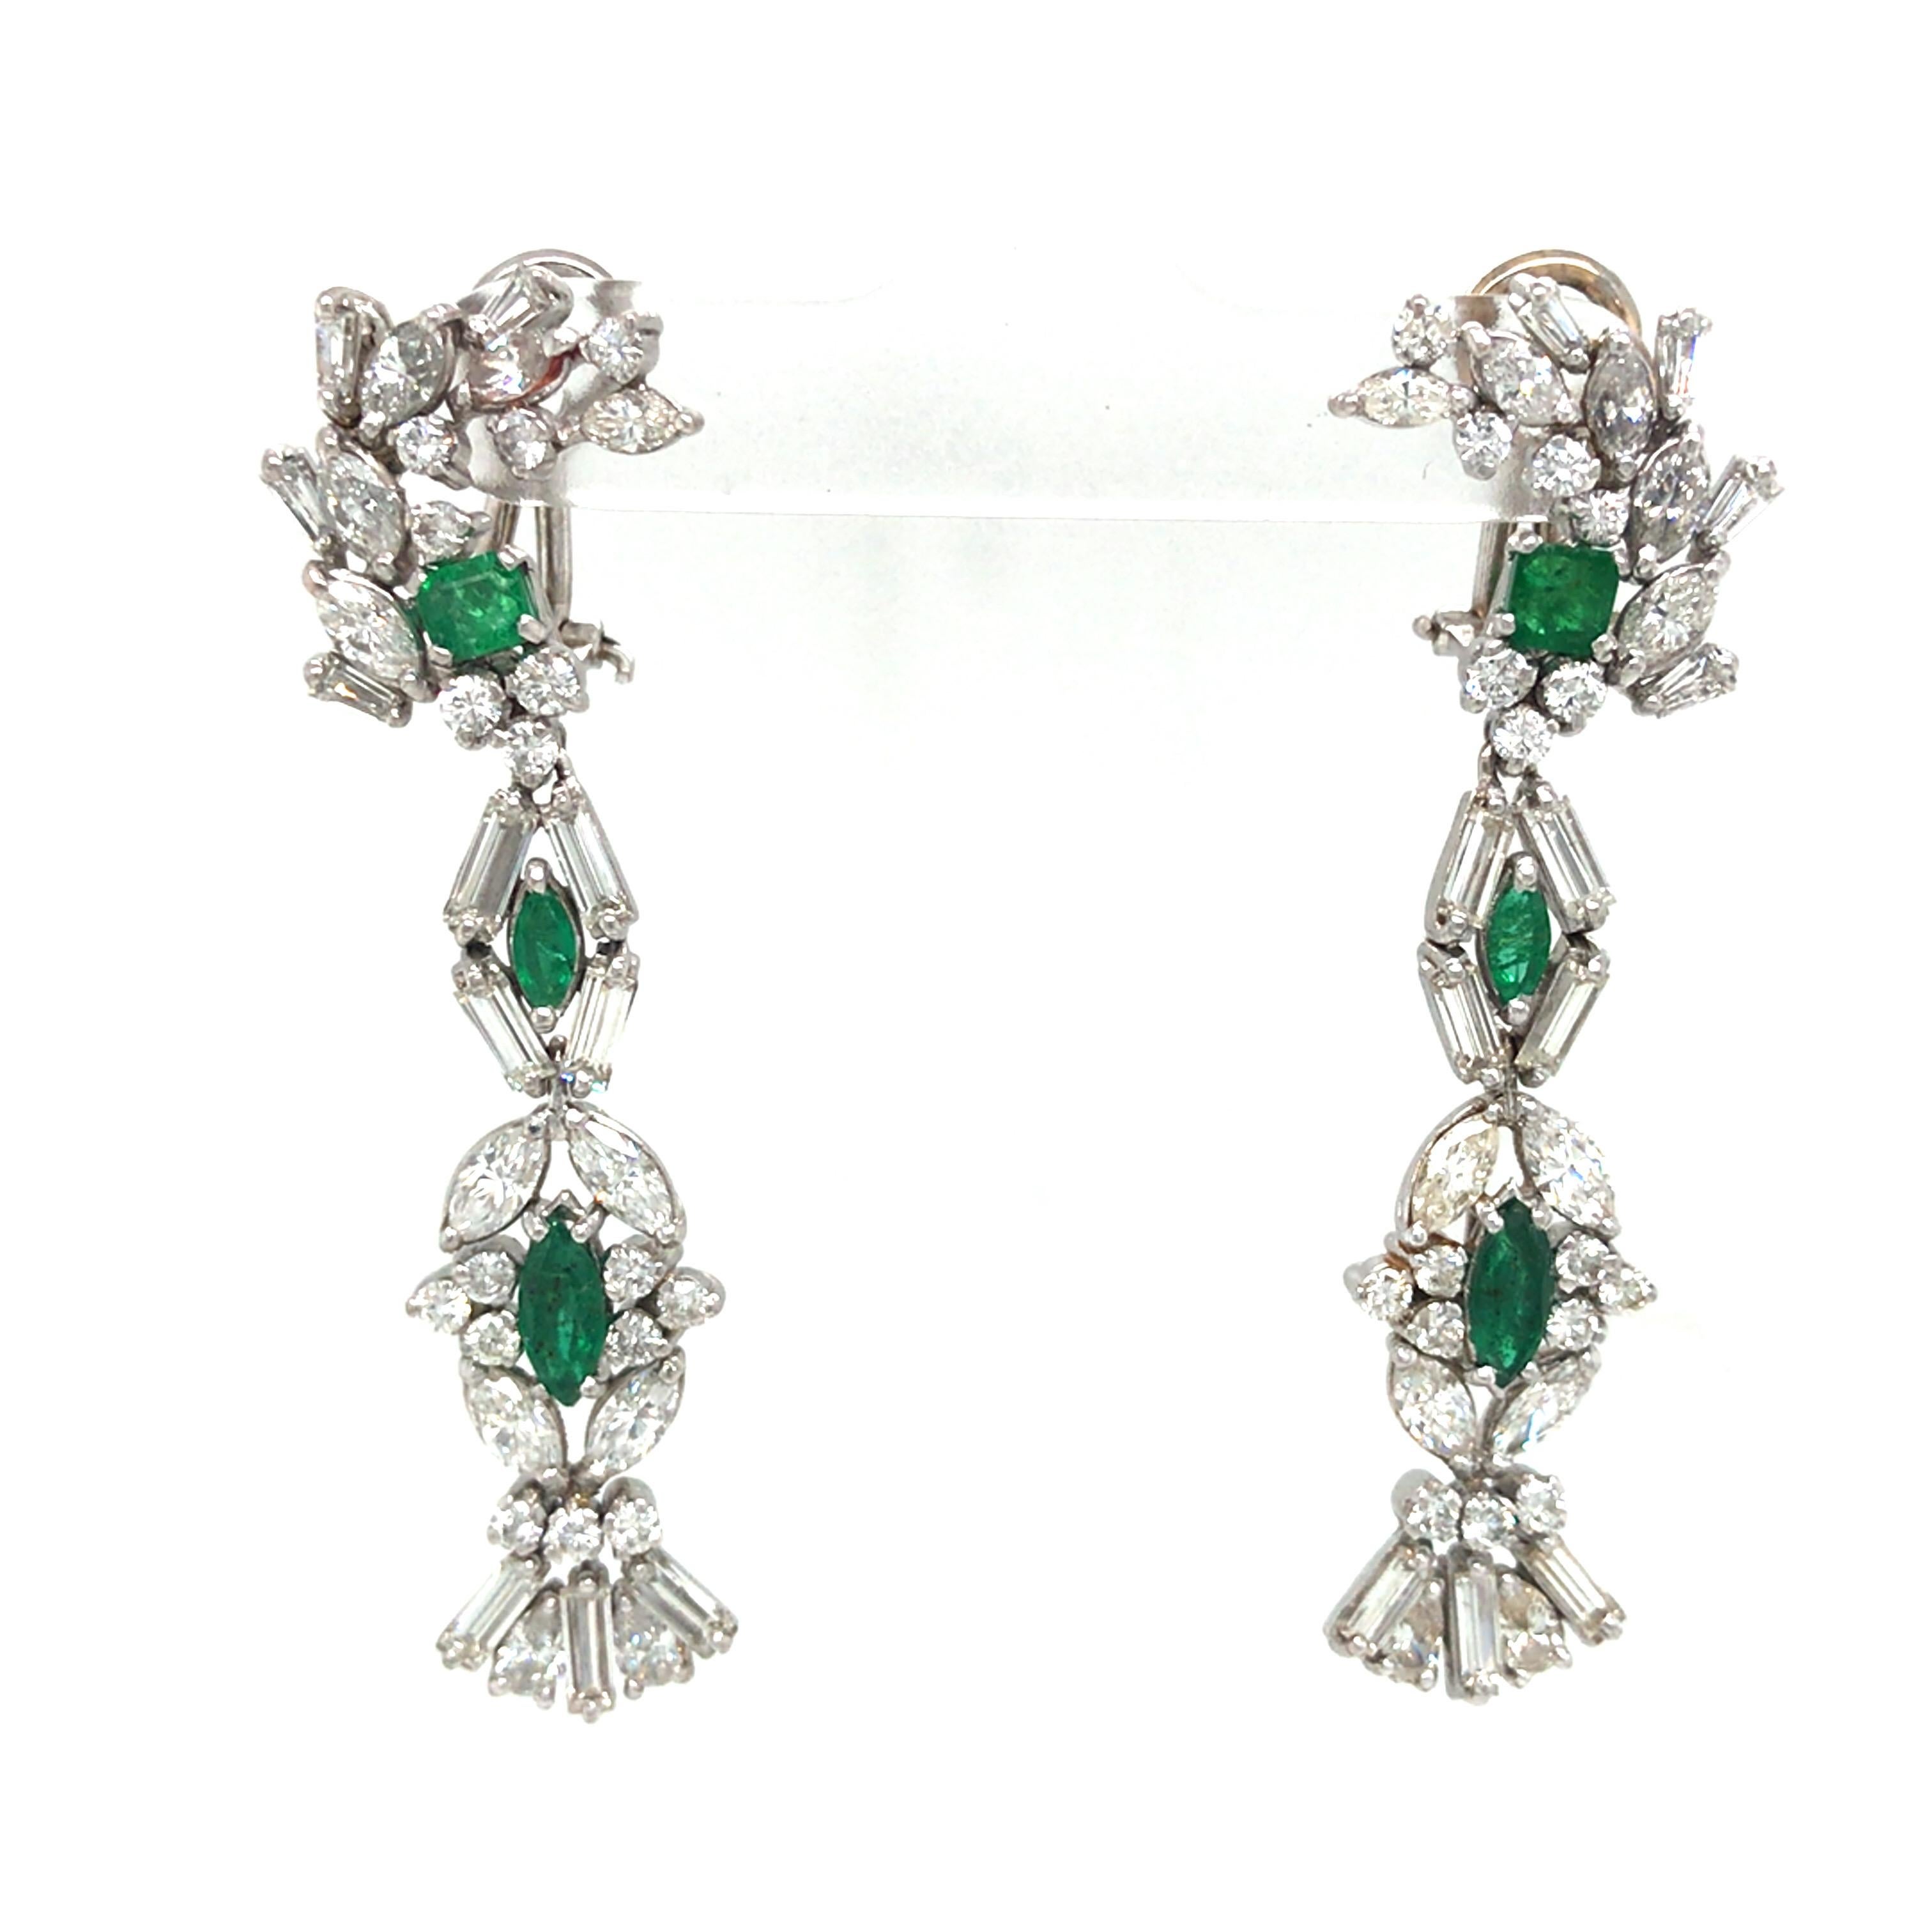 Vintage Fancy Shape Diamond and Green Emerald Diamond Hanging Earring in mix of 10k, 14k and 18k White Gold.  Marquise, Baguette, Round Brilliant Cut and Pear Shape Diamonds weighing 8.10 carat total weight, G-H in color, VS-SI in clarity and (6)